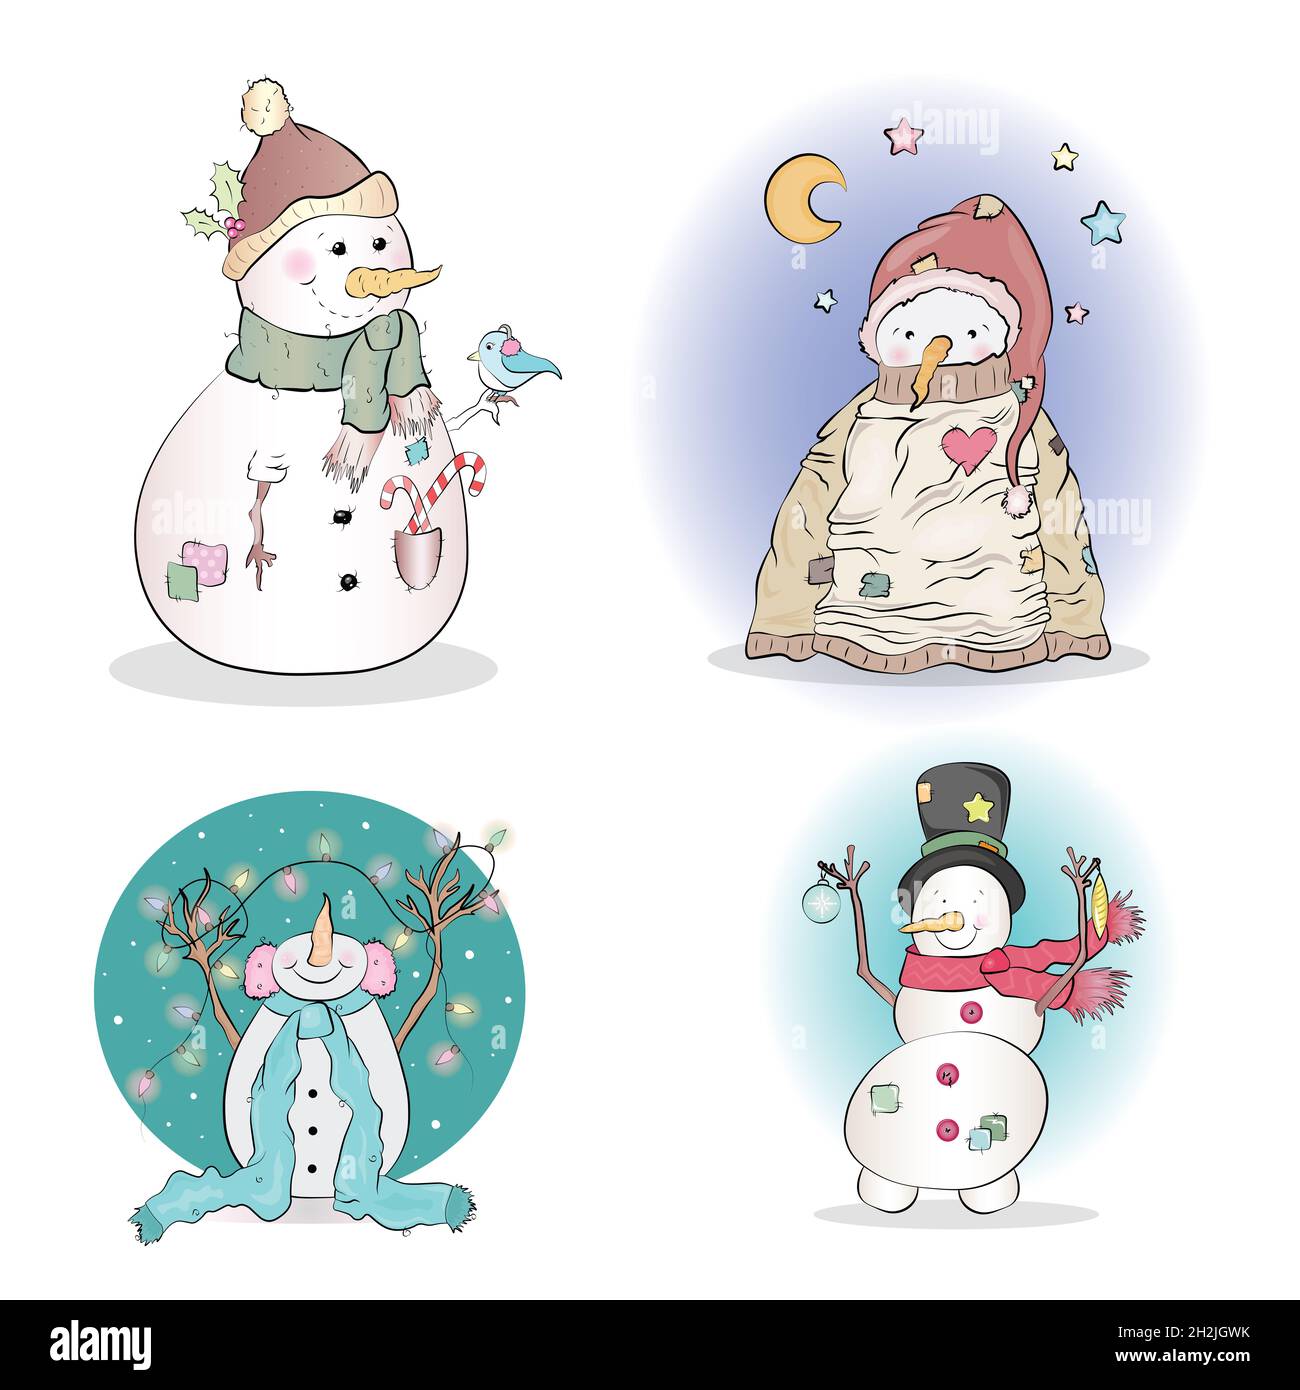 Funny snowman Christmas character set isolated on white background illustration Stock Photo